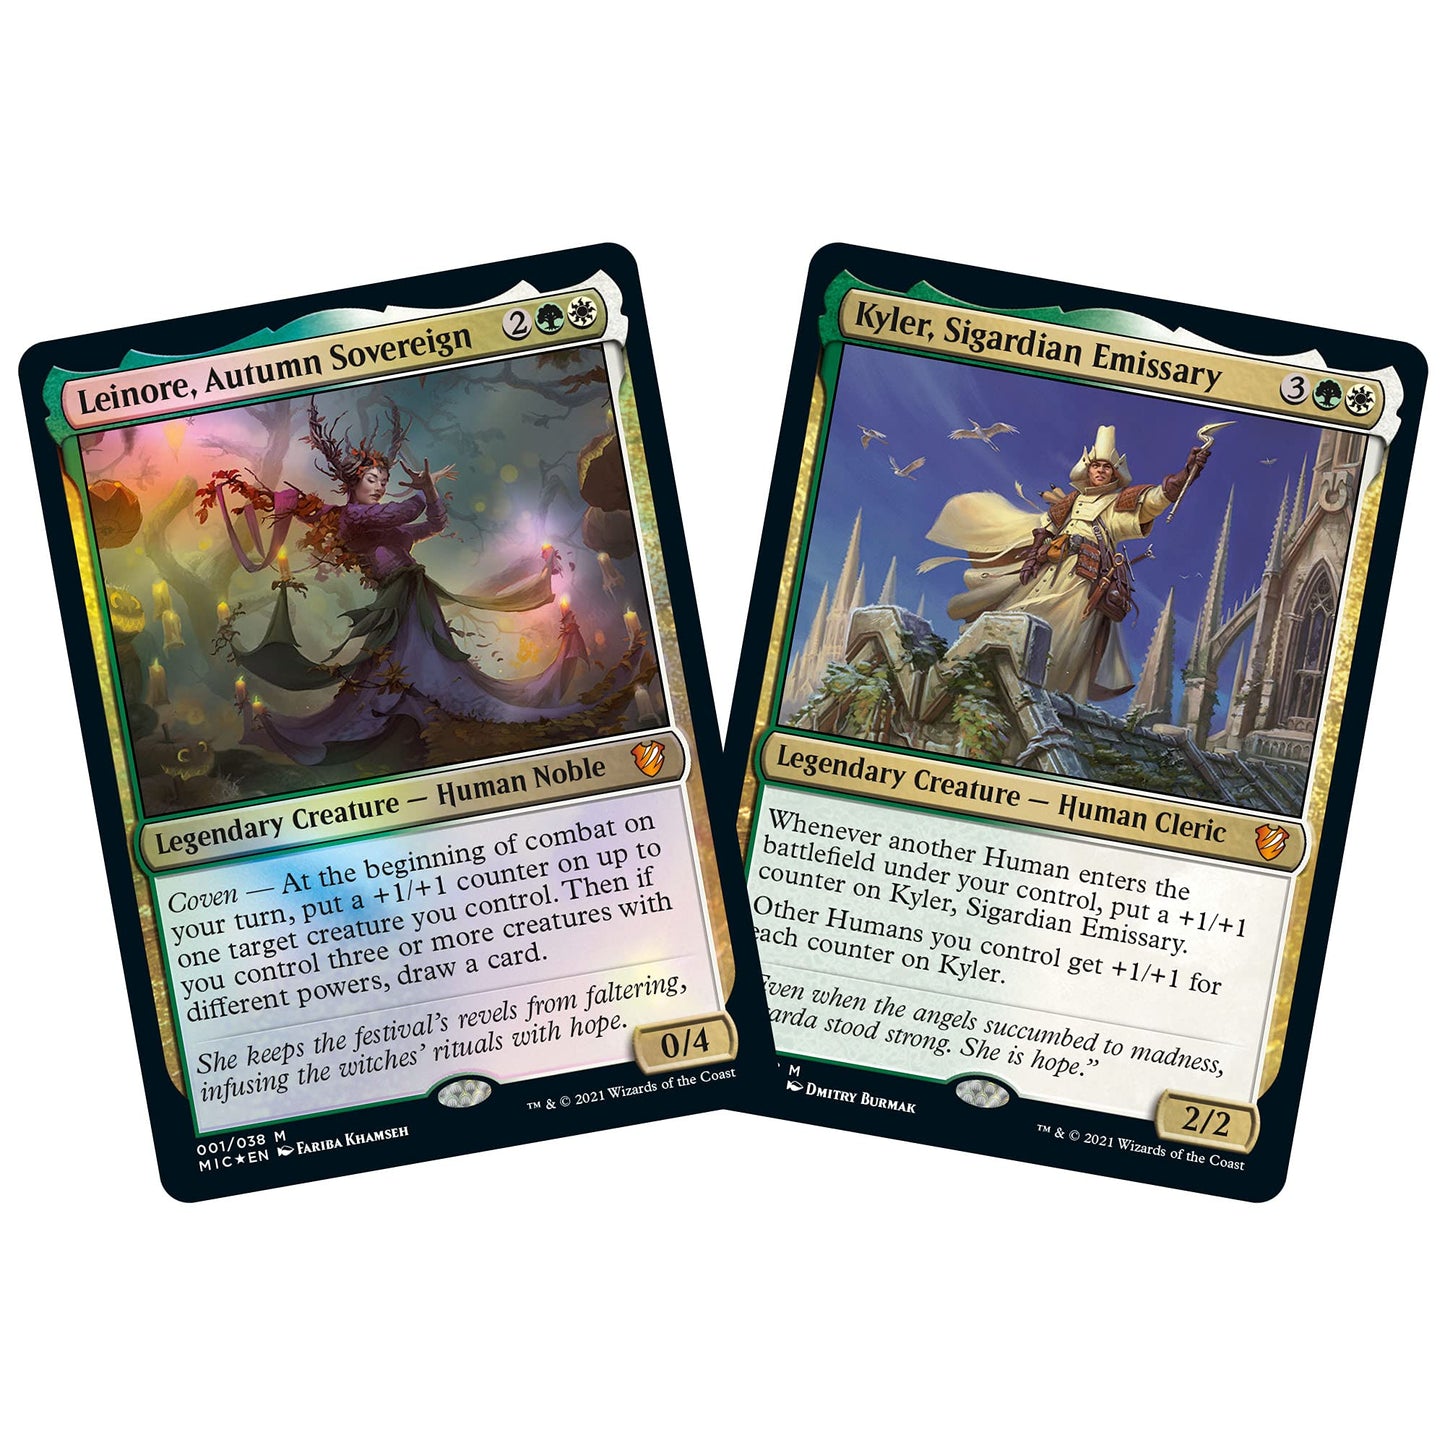 Magic: The Gathering Innistrad: Midnight Hunt Commander Deck – Coven Counters (Green-White)